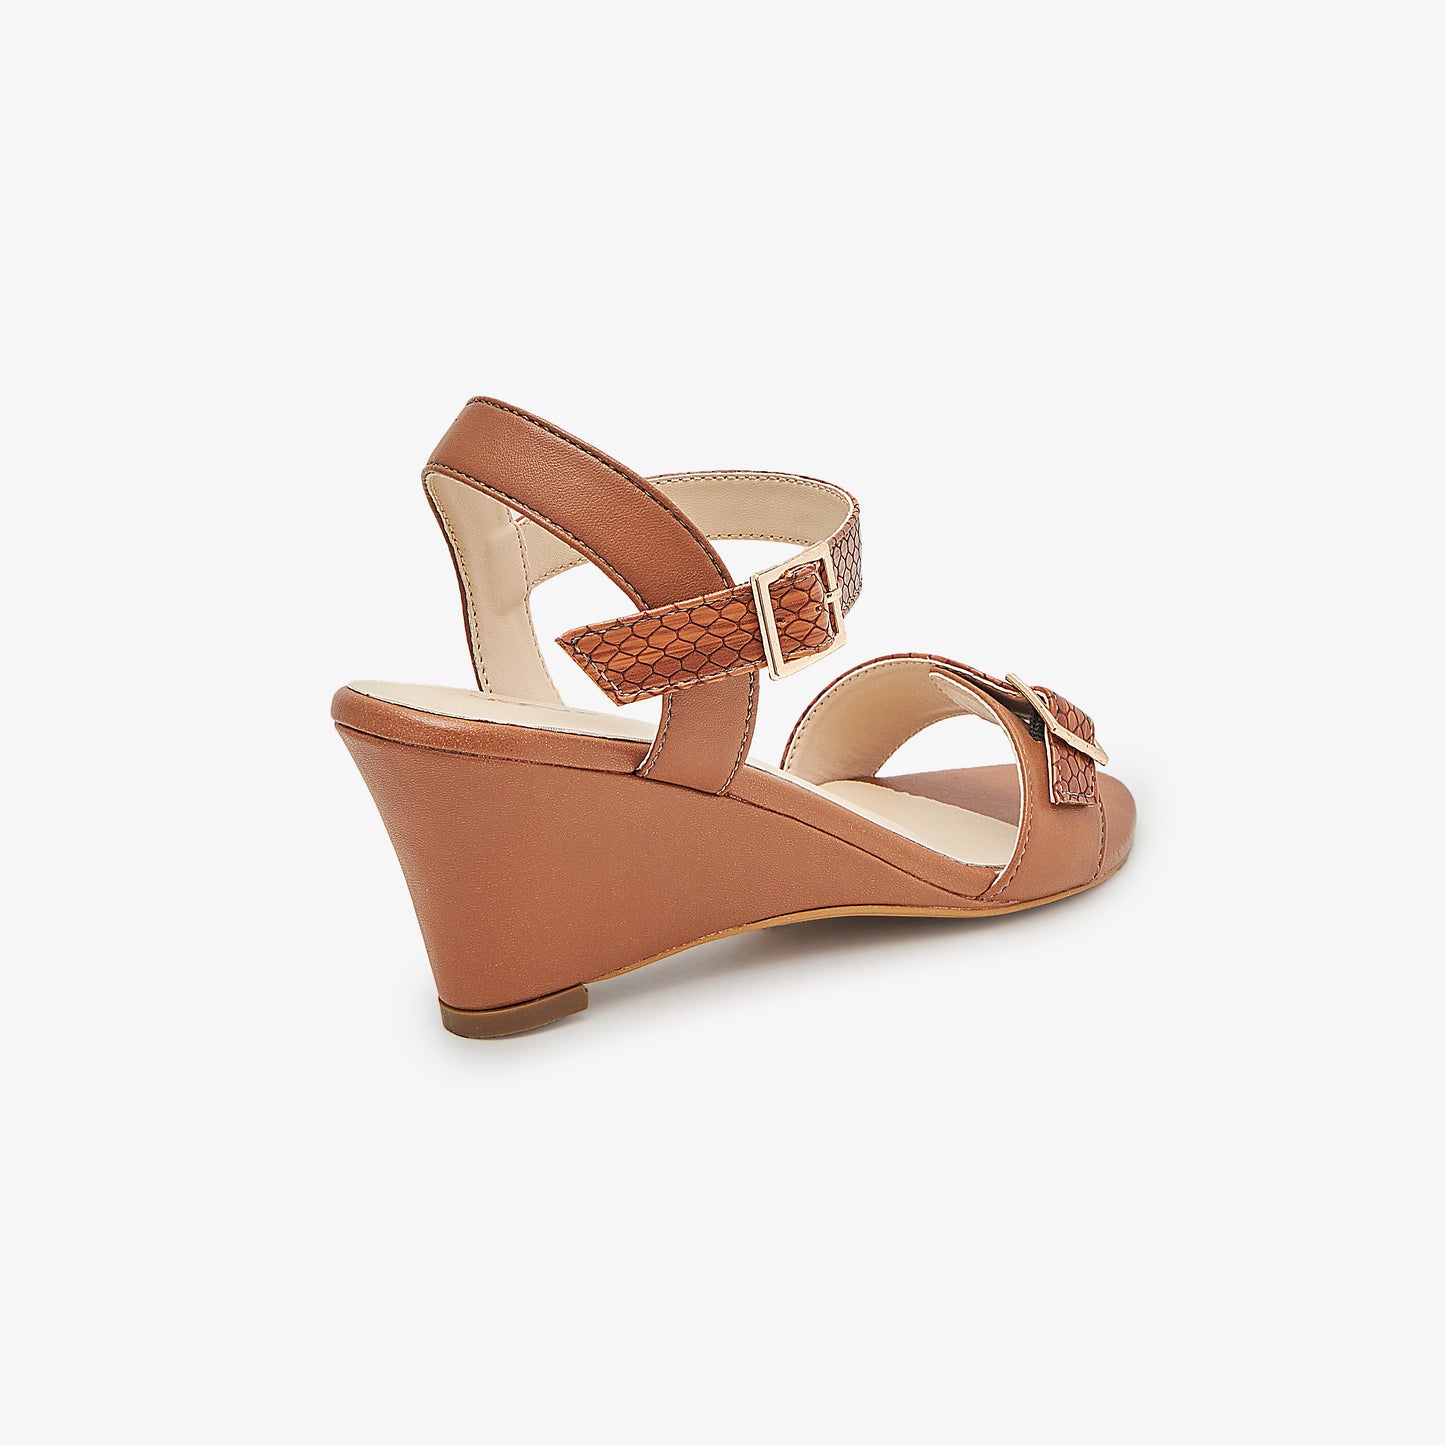 Buckled Wedges